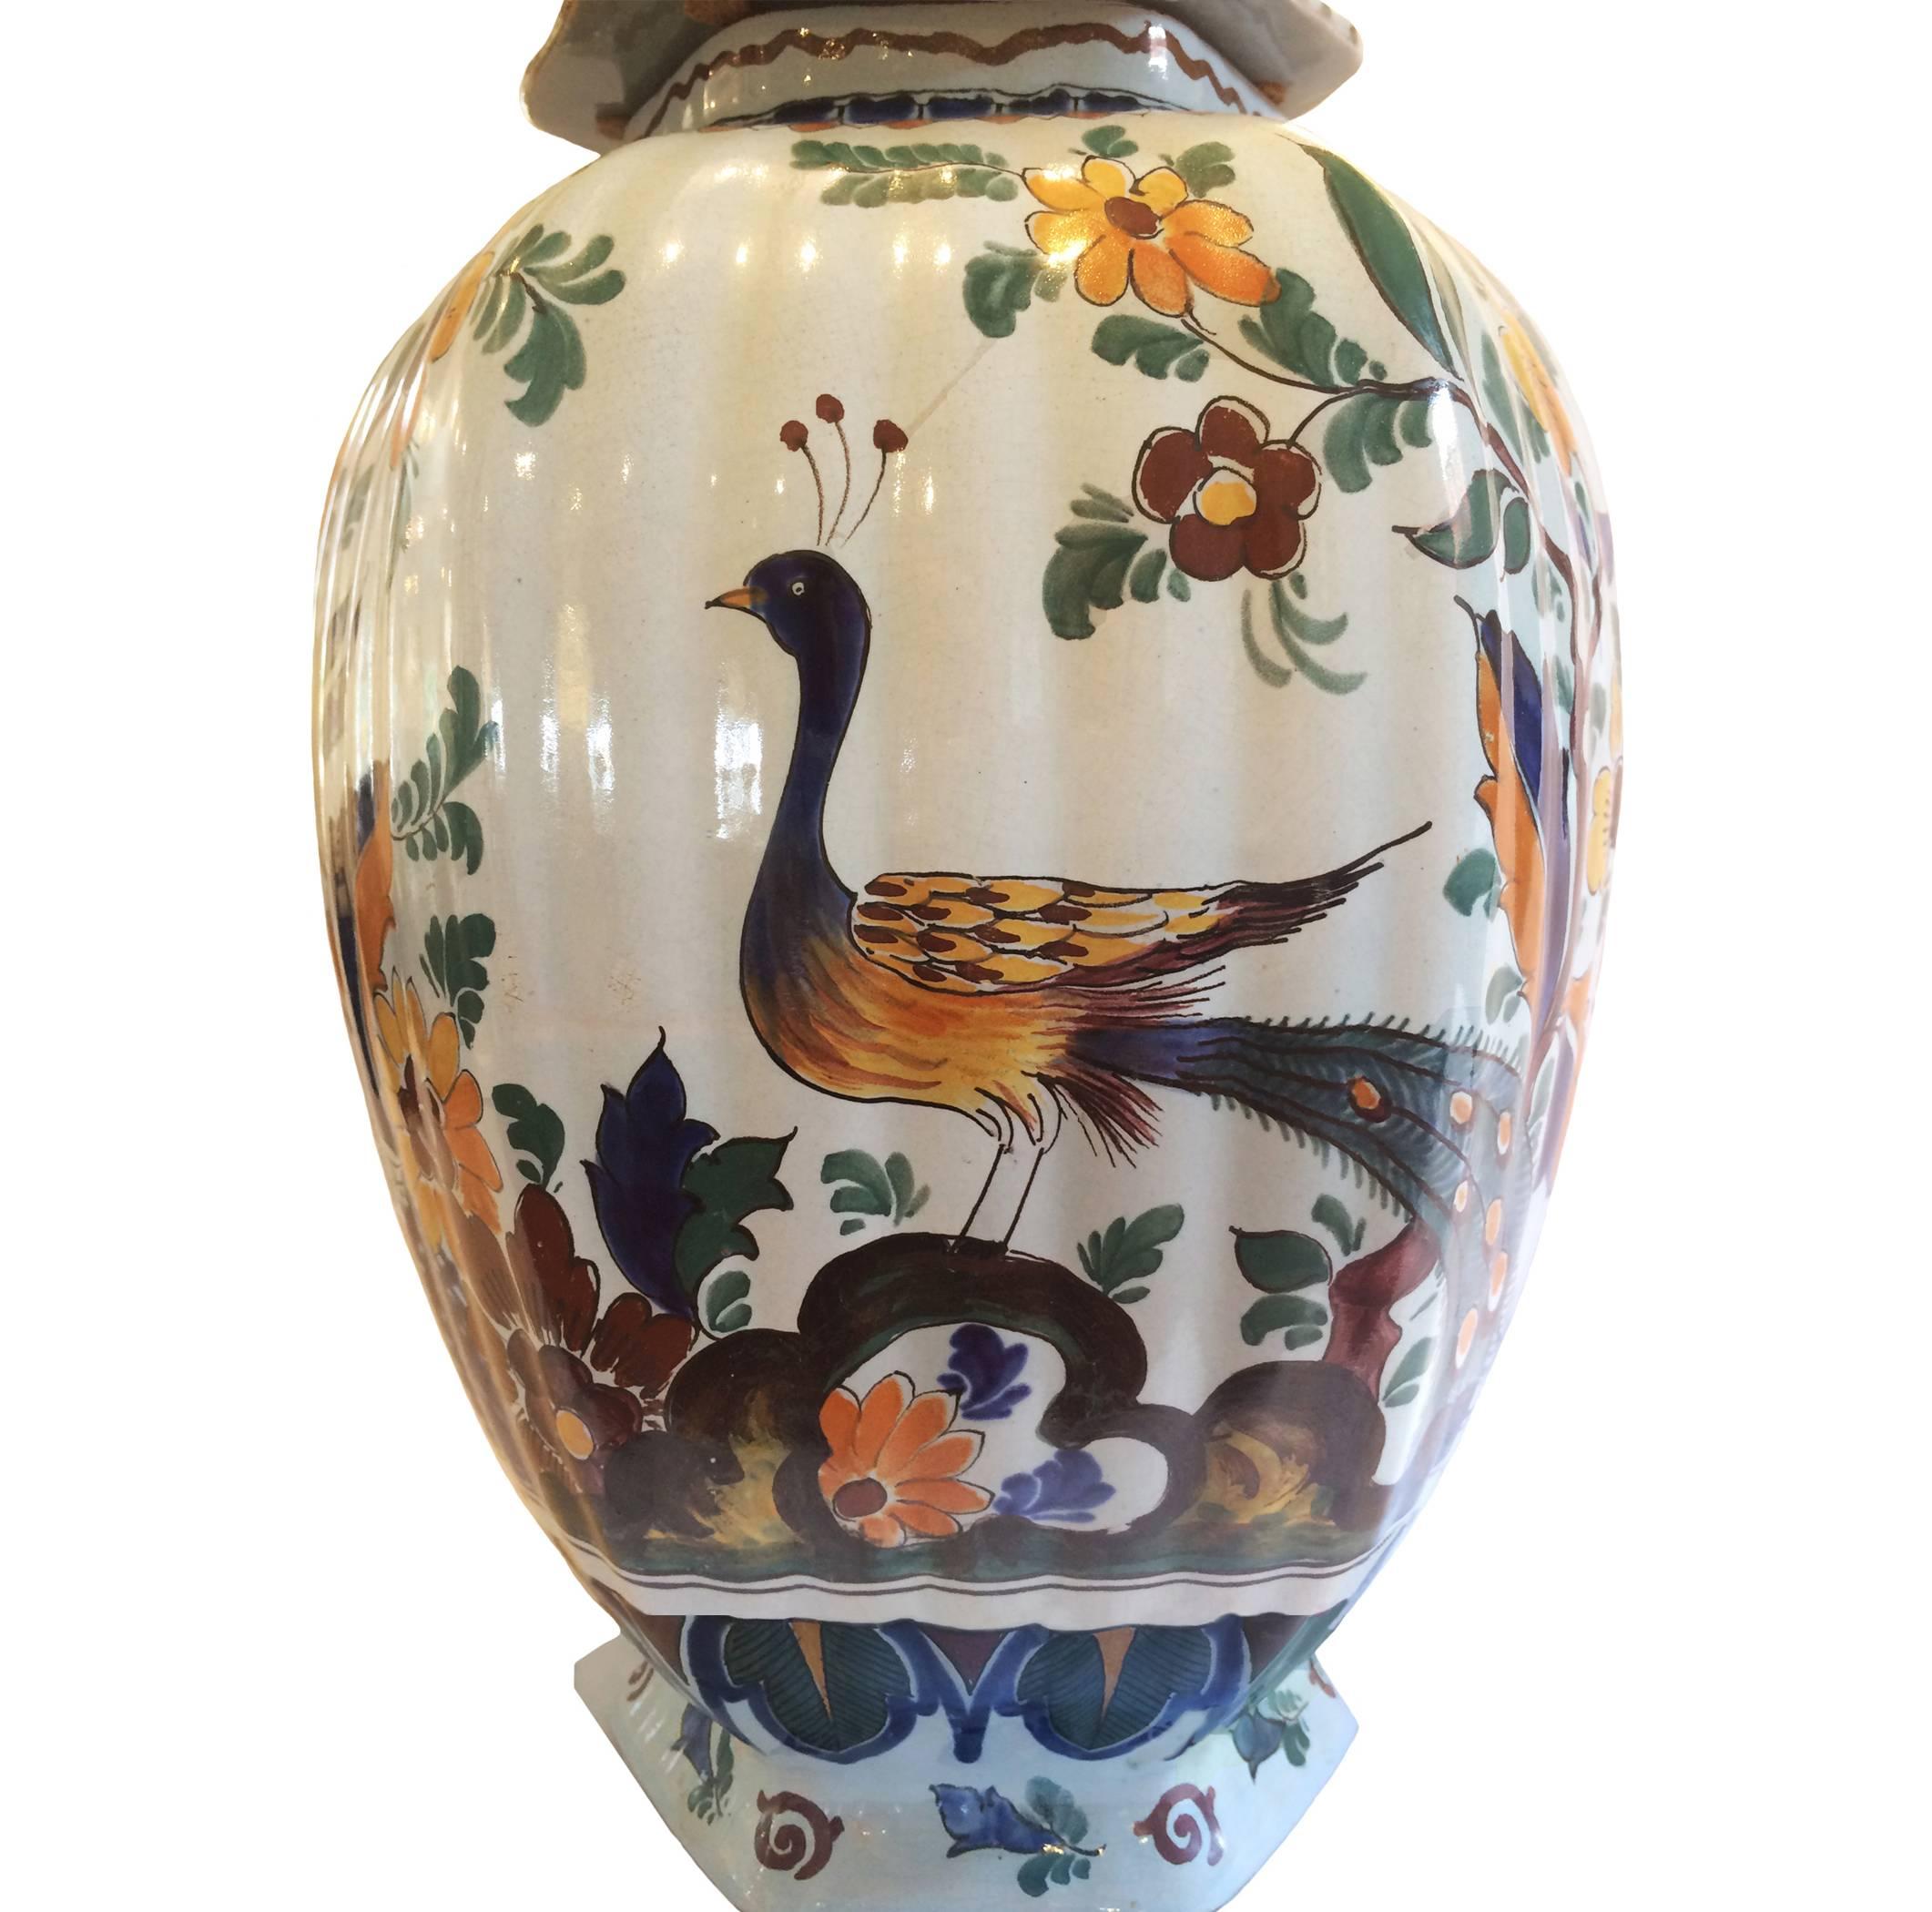 Delft polychrome tin glazed lobed fainece covered urn; peacock, floral and bird motif, 19th century.